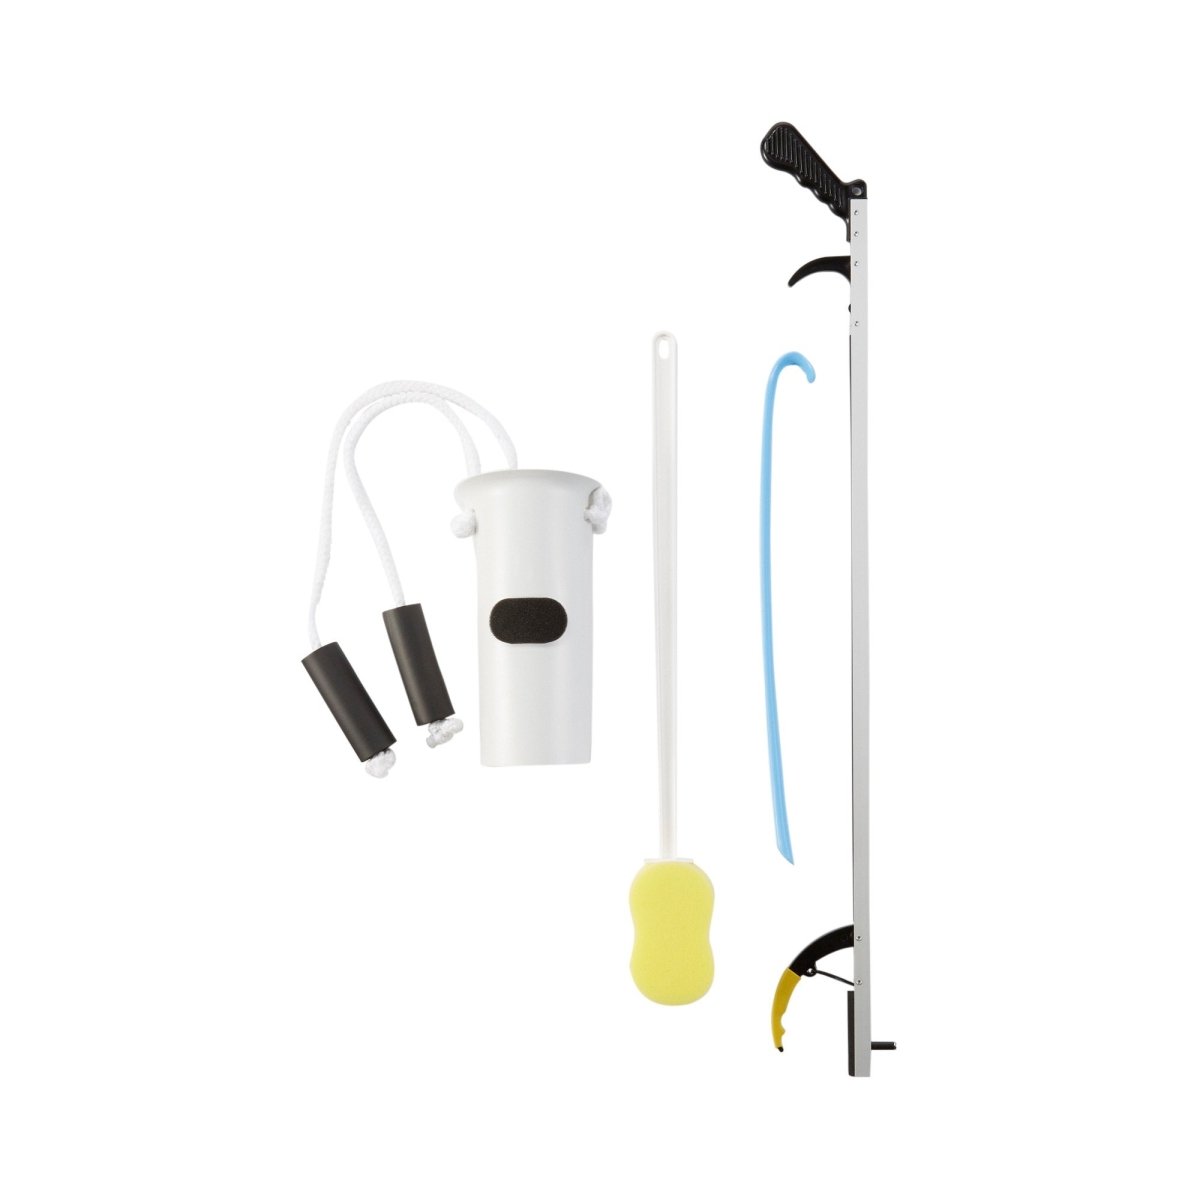 FabLife Hip Kit with 32 Inch Reacher and 18 Inch Plastic Shoehorn - 814425_EA - 1